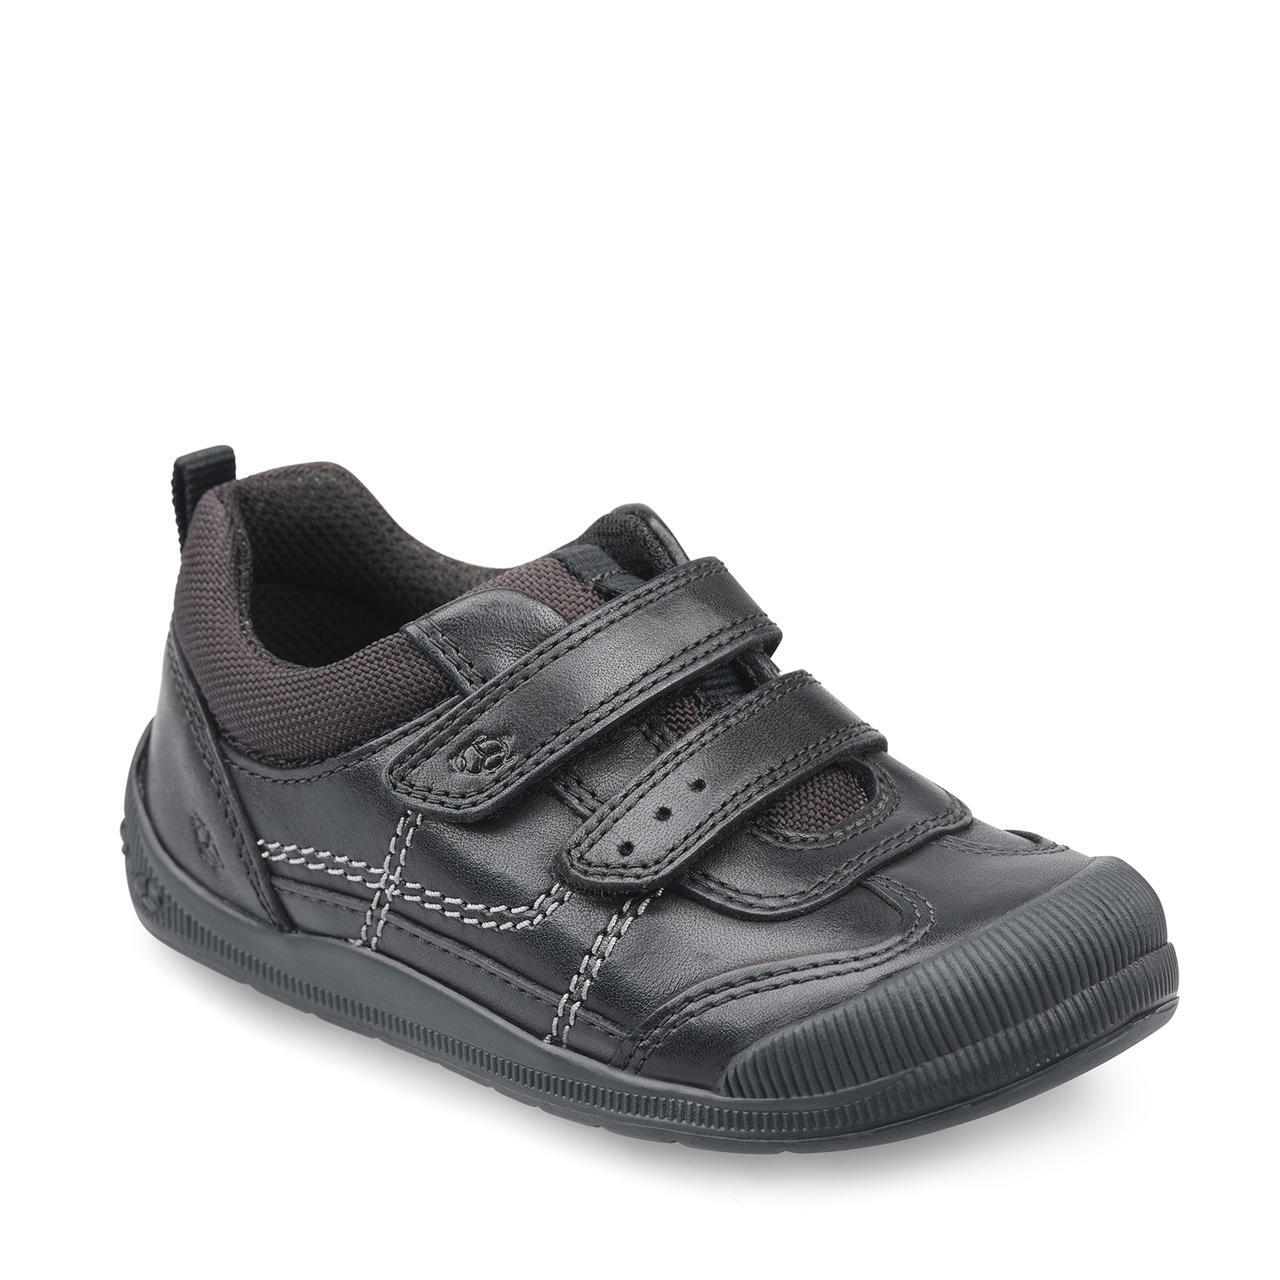 A boys pre school shoe by Start Rite,style Tickle, in black leather with double velcro fastening. Angled view.